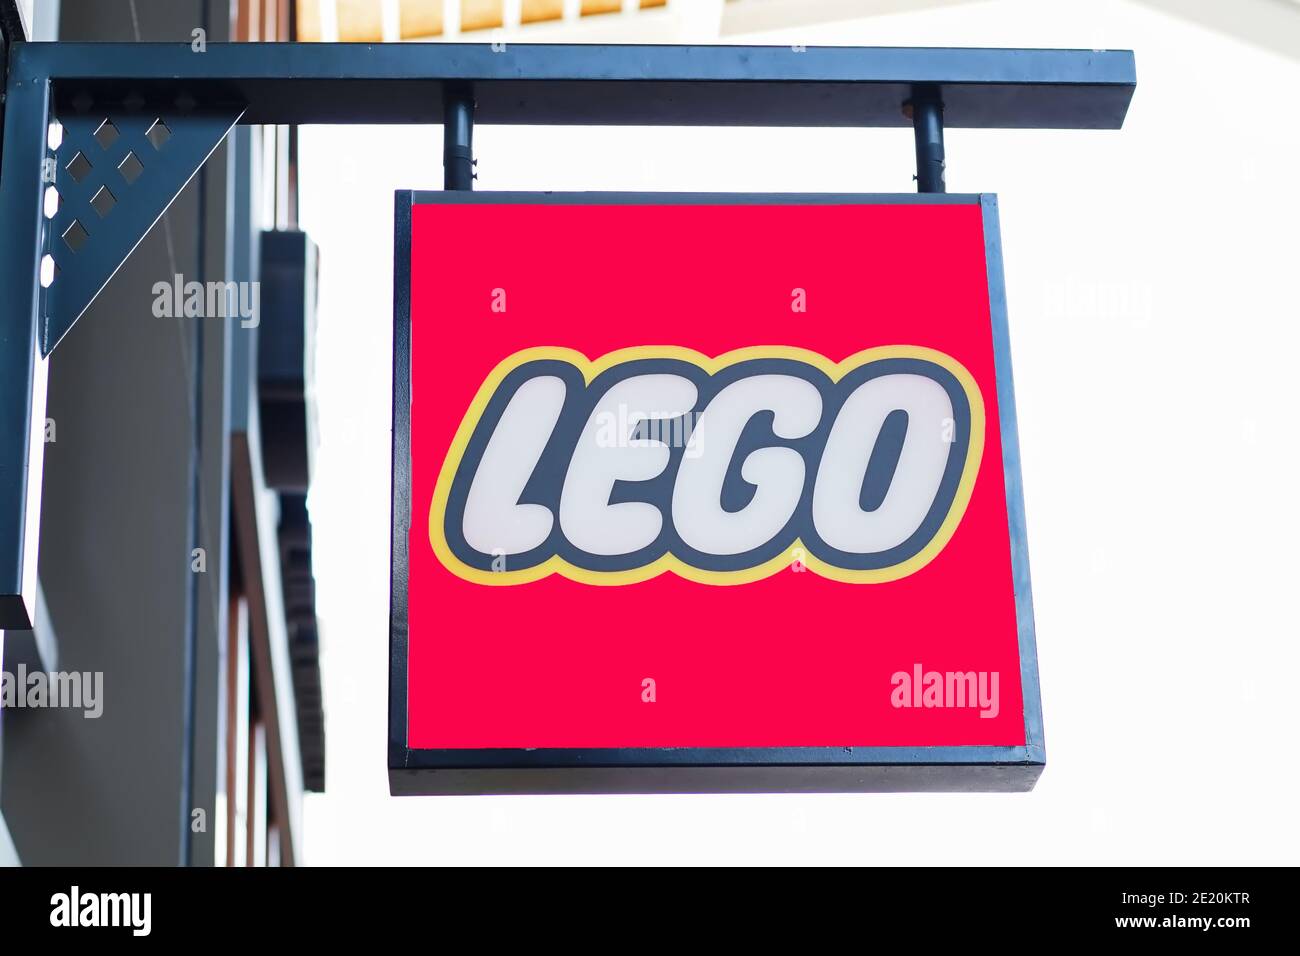 Samut Prakan, Thailand - November 02, 2020: Sign of Lego Store in Central Village Shopping Mall. Lego Group is a construction toys manufacturer based Stock Photo